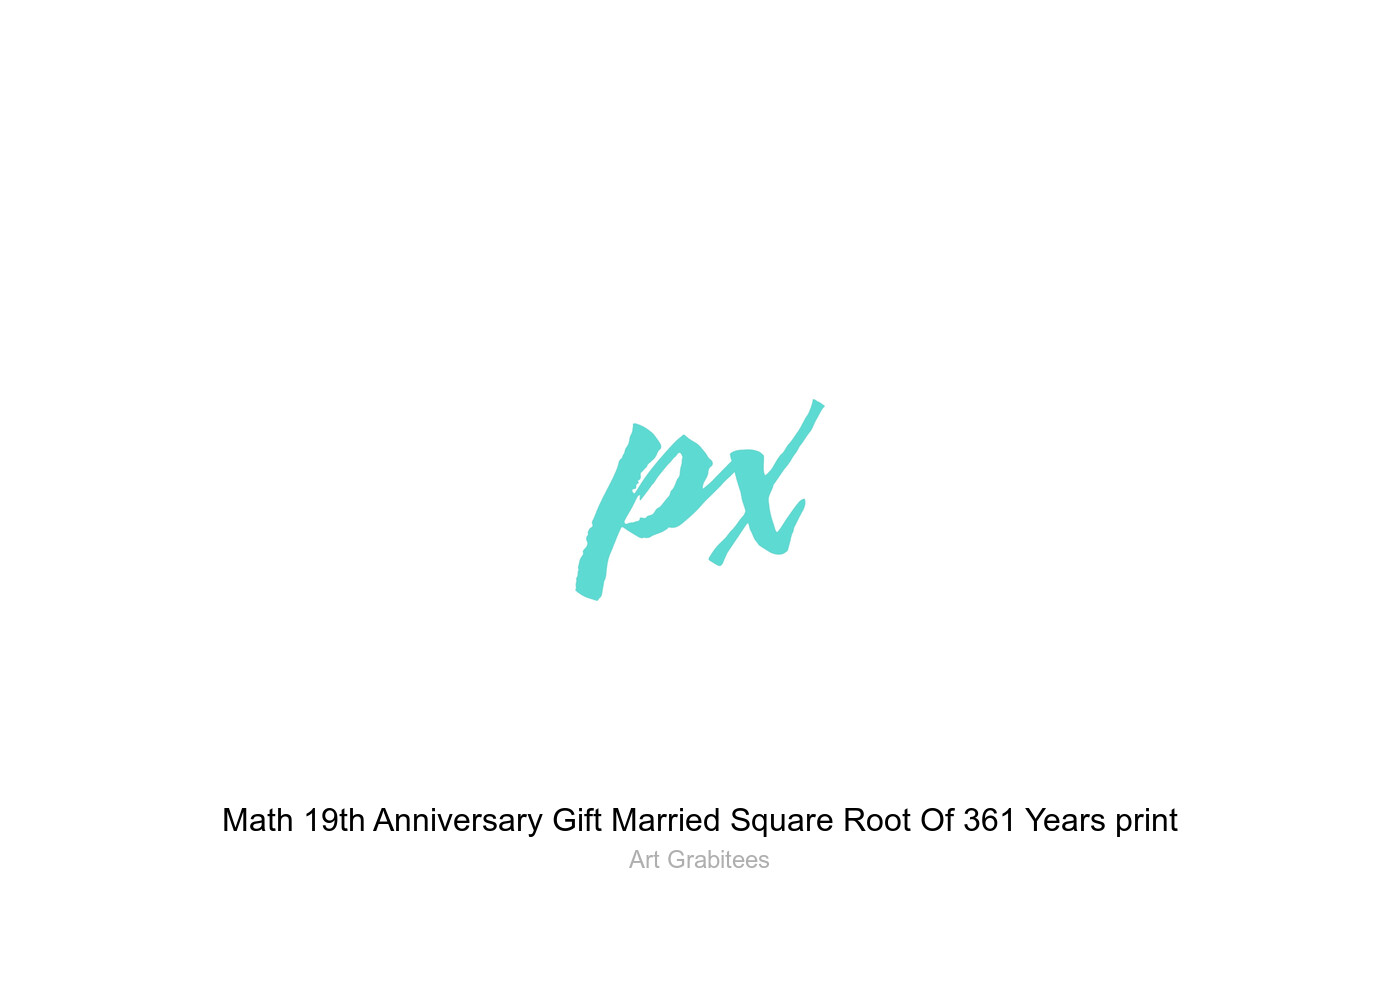 Math 19th Anniversary Gift Married Square Root Of 361 Years print